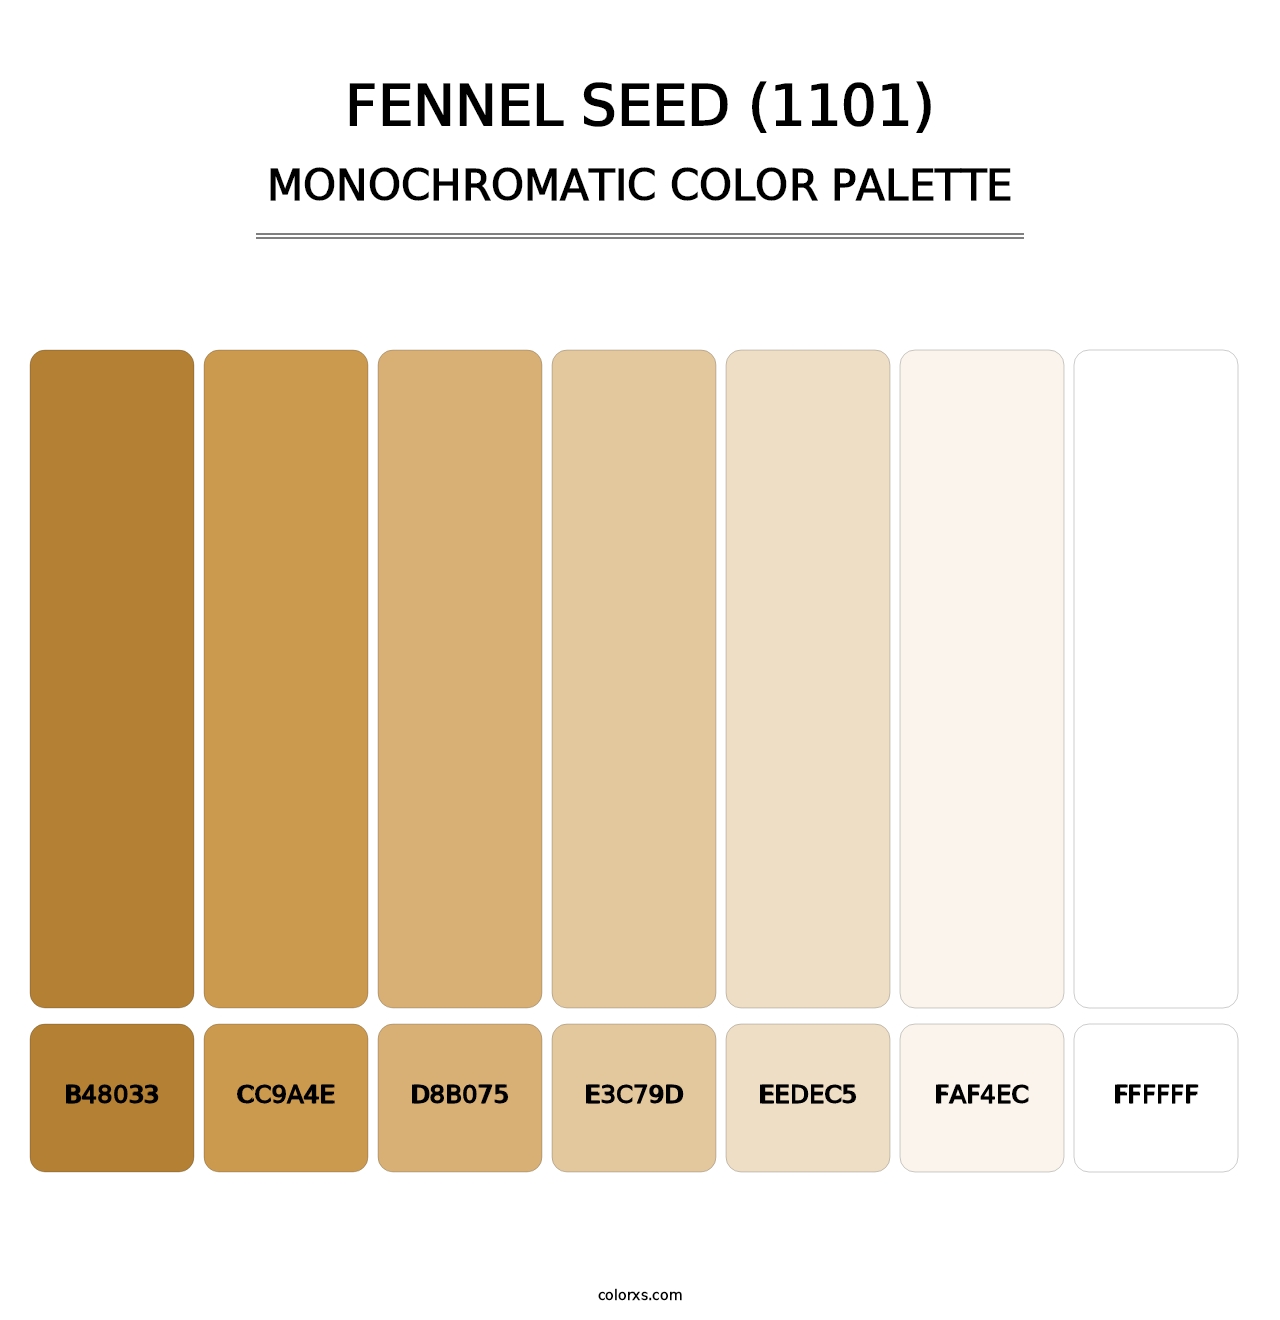 Fennel Seed (1101) - Monochromatic Color Palette